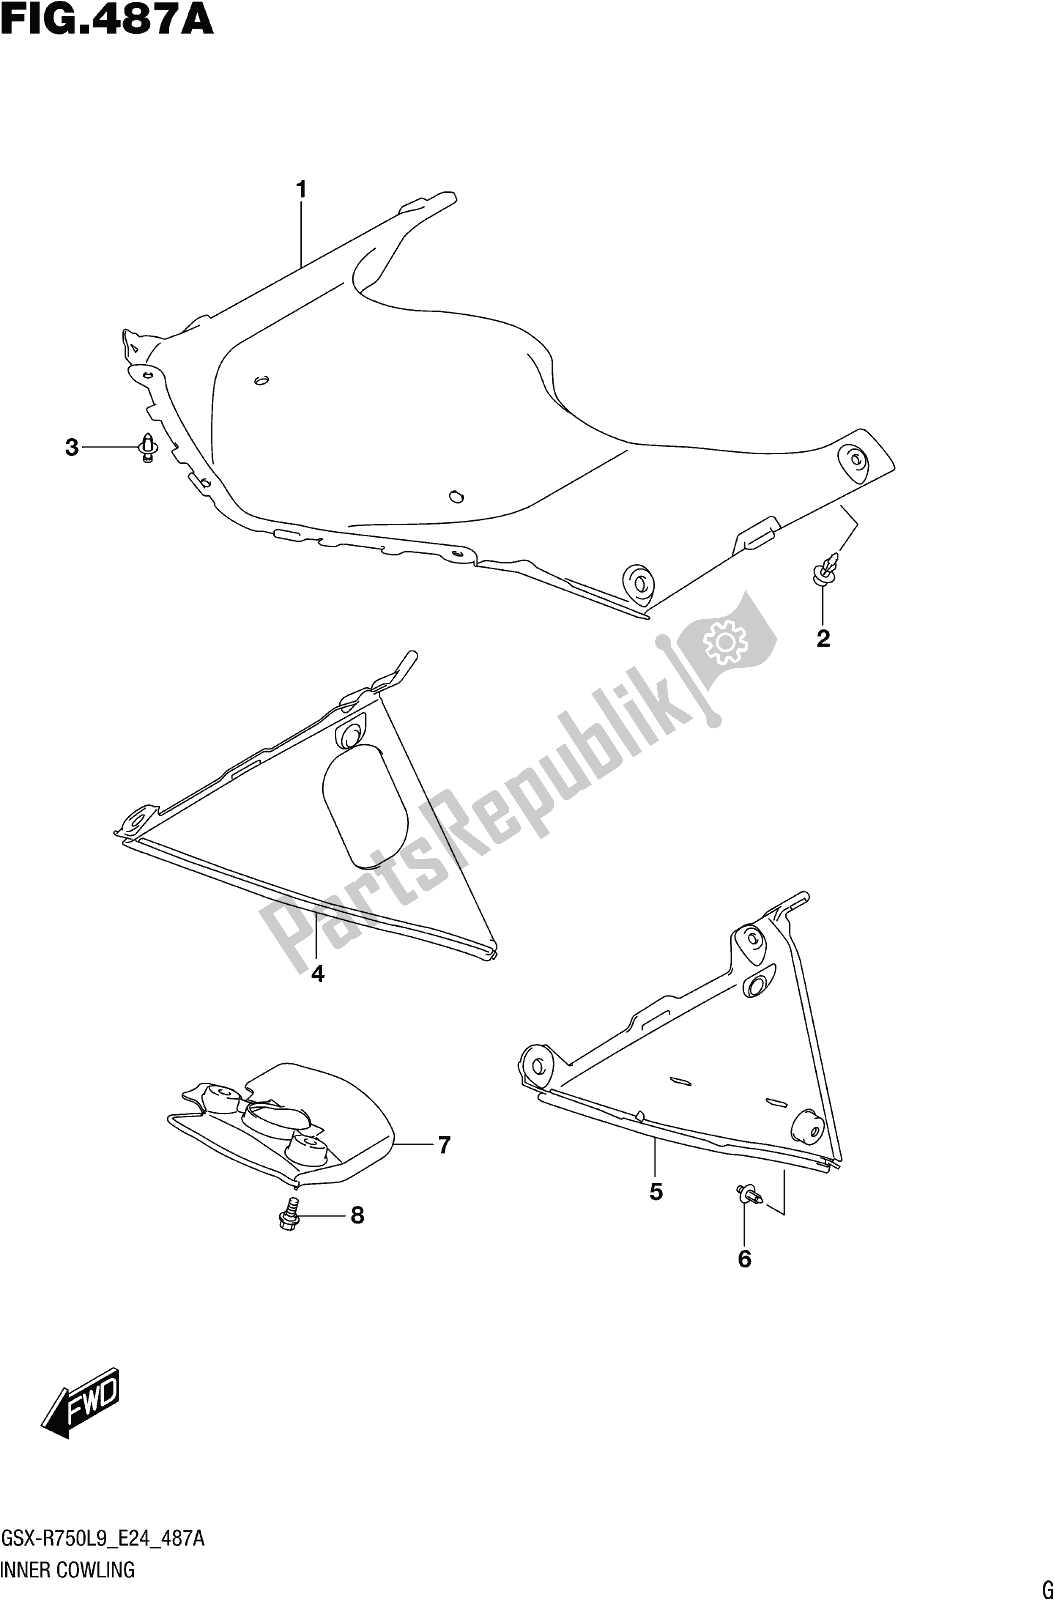 All parts for the Fig. 487a Inner Cowling of the Suzuki Gsx-r 750 2019